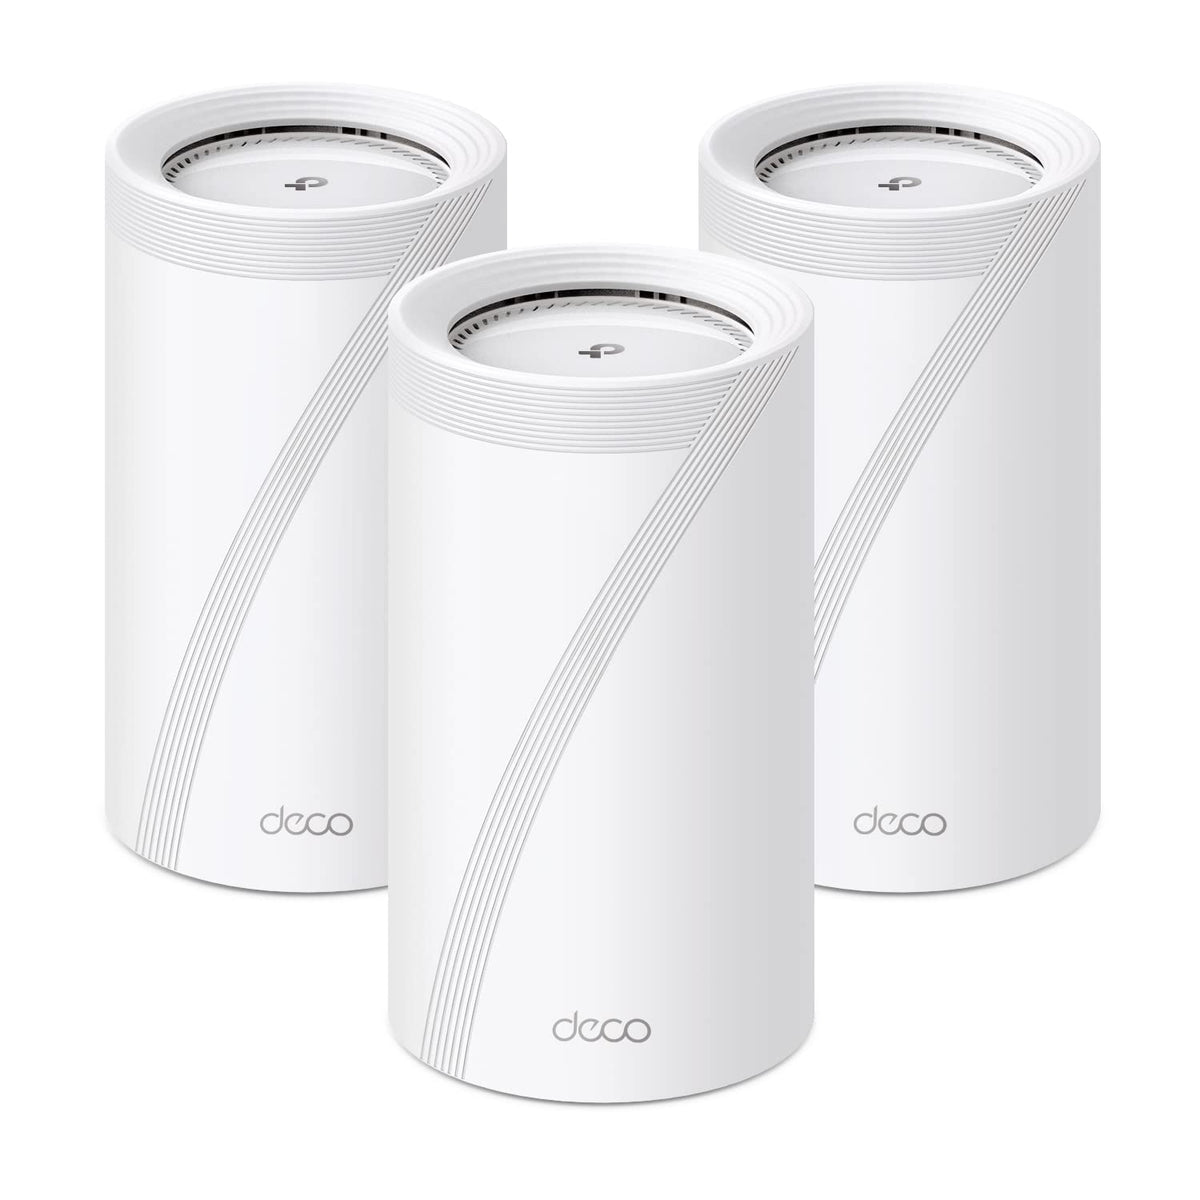  TP-Link Deco AX3000 WiFi 6 Mesh System(Deco X55) - Covers up to  6500 Sq.Ft. , Replaces Wireless Router and Extender, 3 Gigabit ports per  unit, supports Ethernet Backhaul (3-pack) : Everything Else